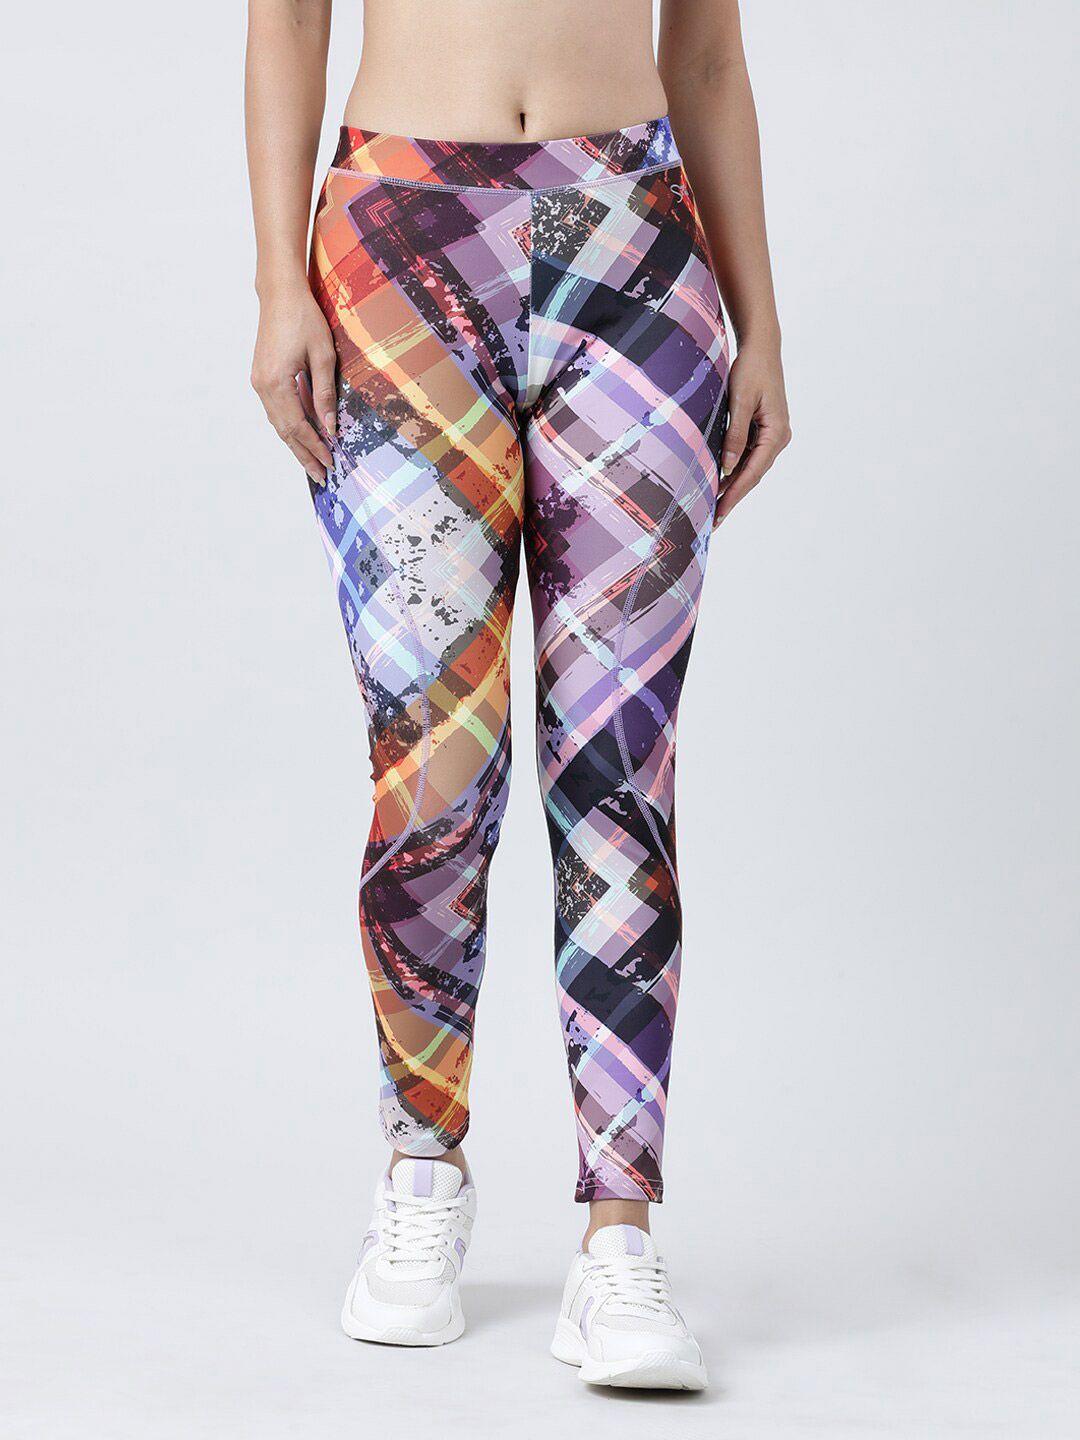 lovable sport printed ankle length dry fit training or gym tights